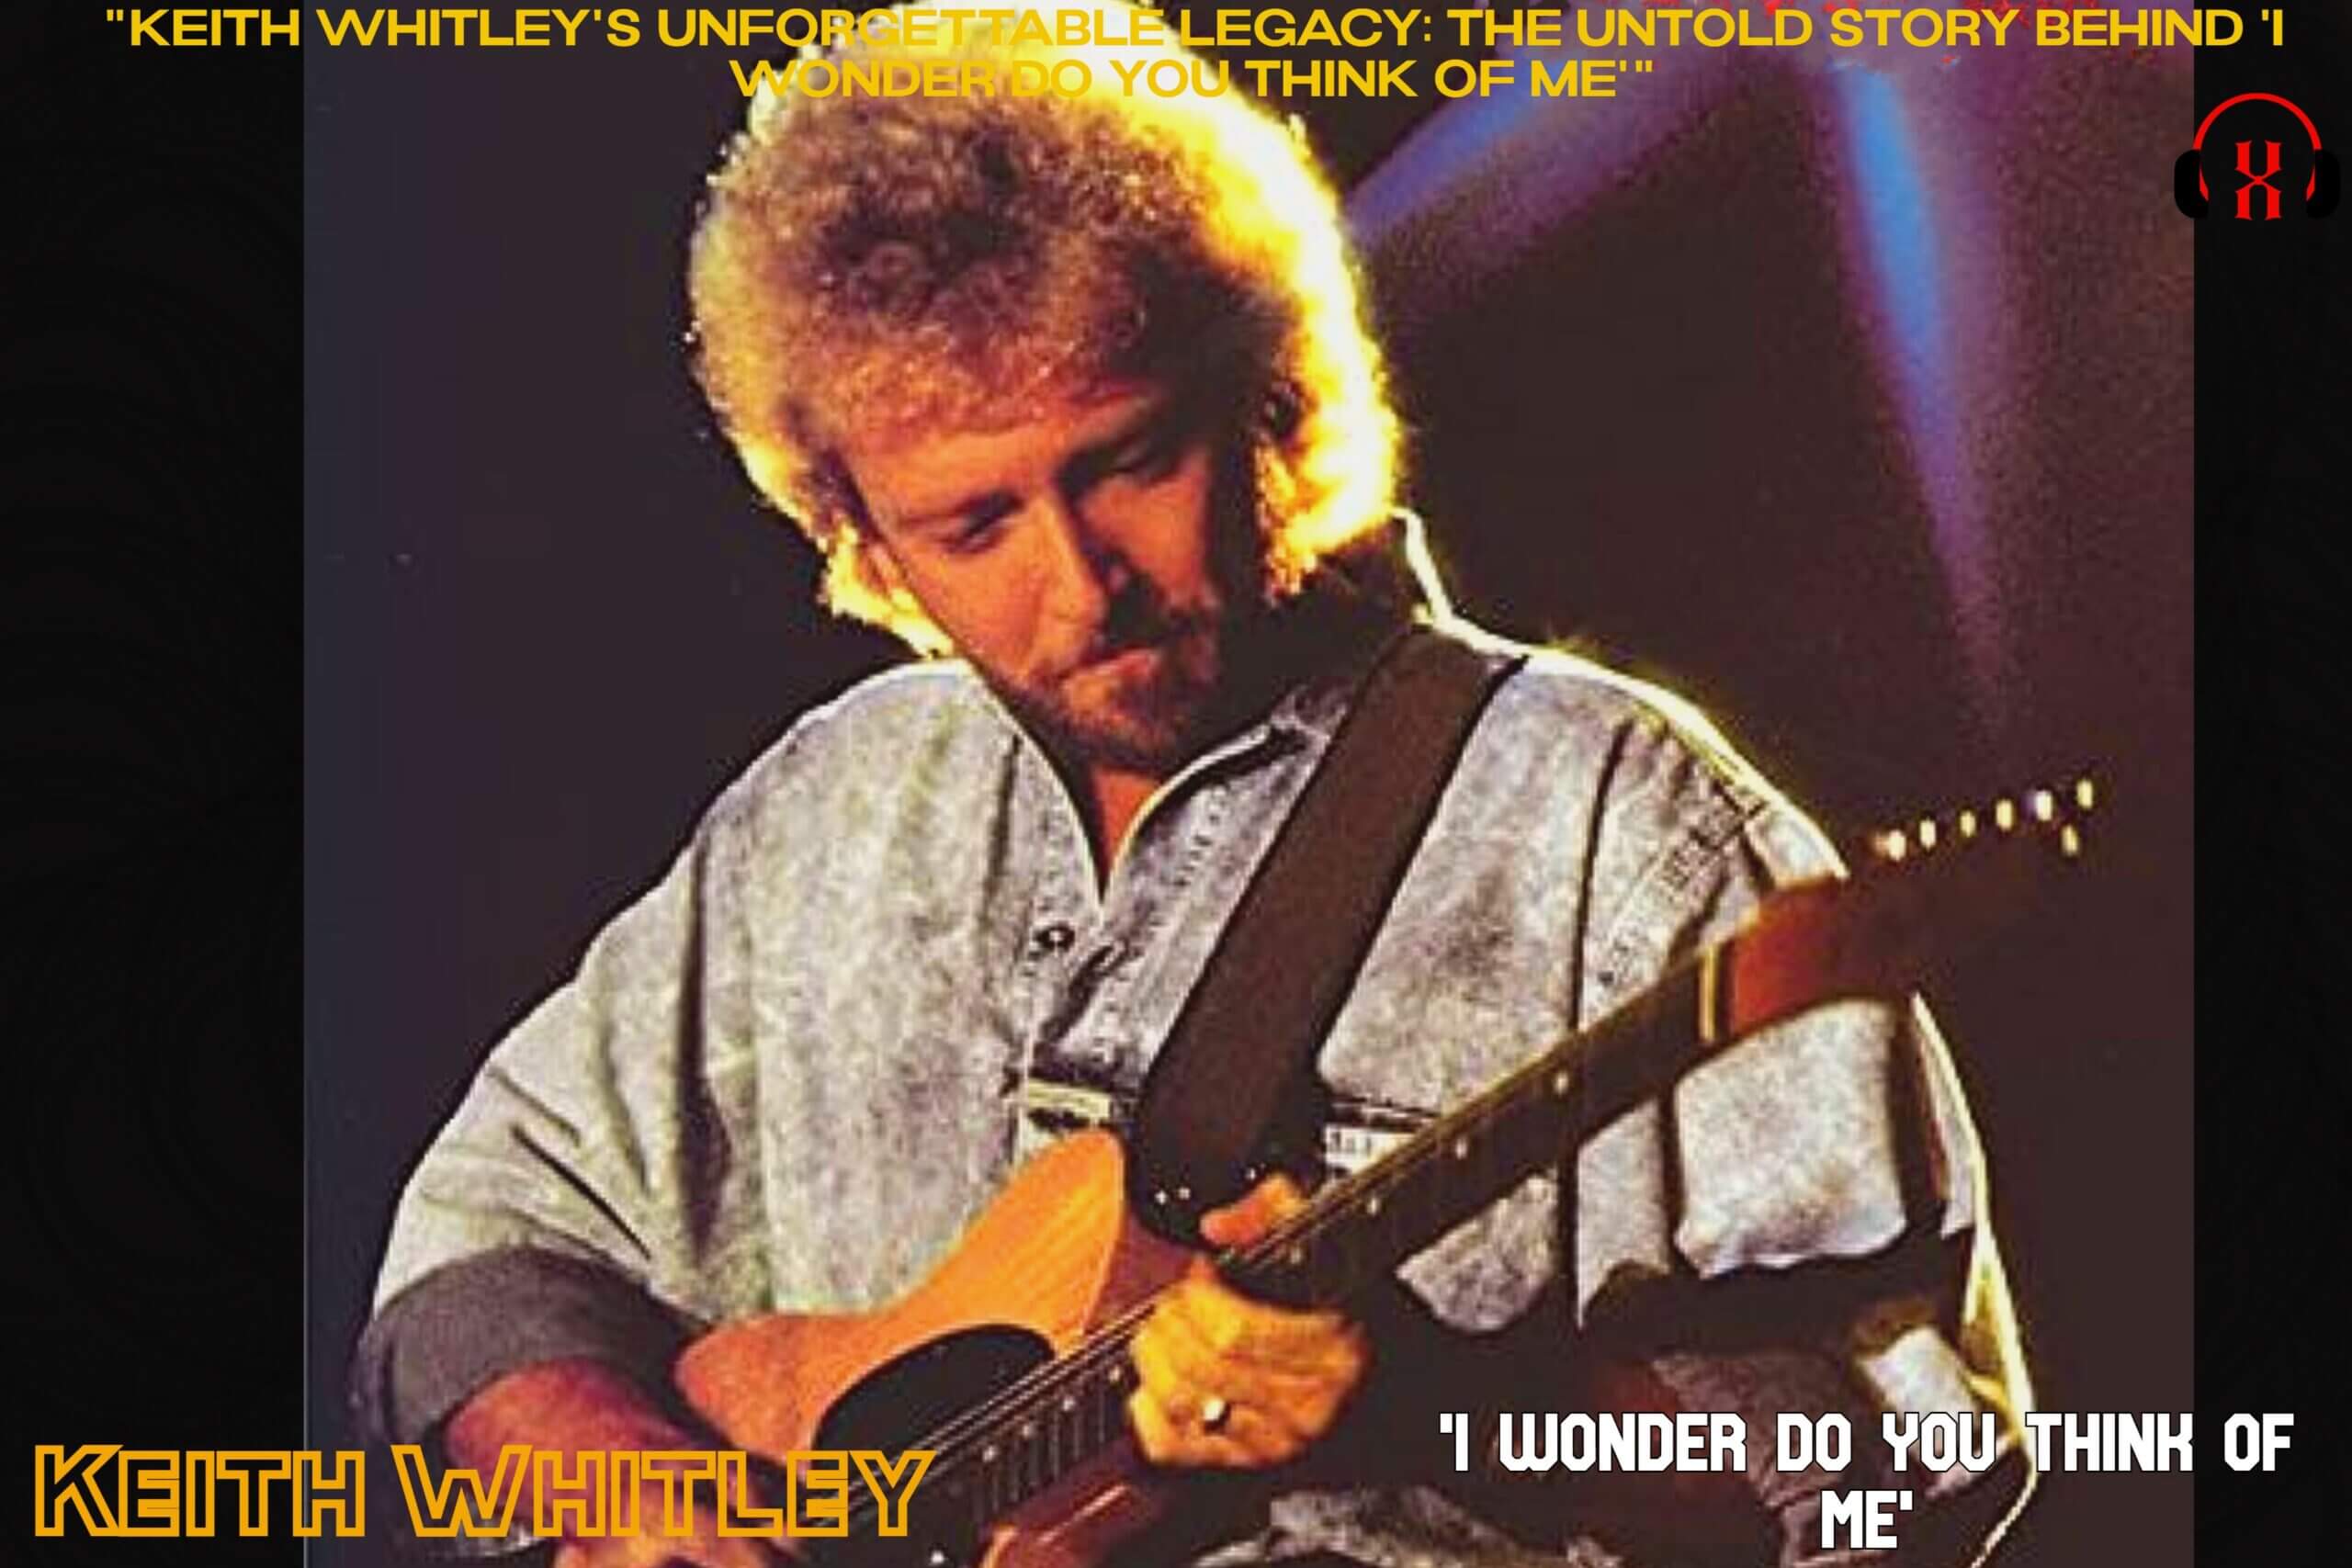 "Keith Whitley's Unforgettable Legacy: The Untold Story Behind 'I Wonder Do You Think Of Me'"